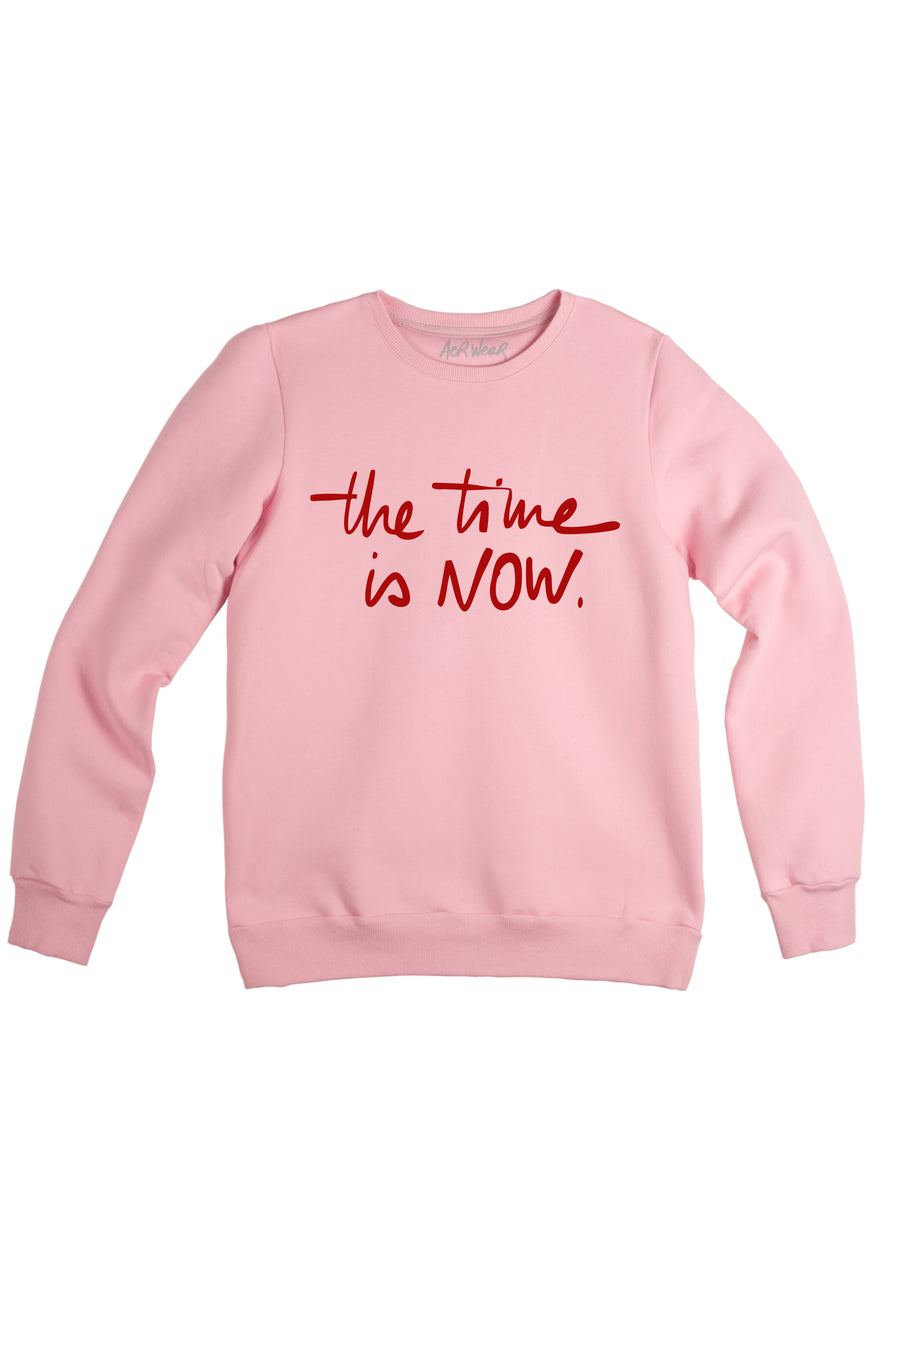 THE TIME IS NOW sweatshirt